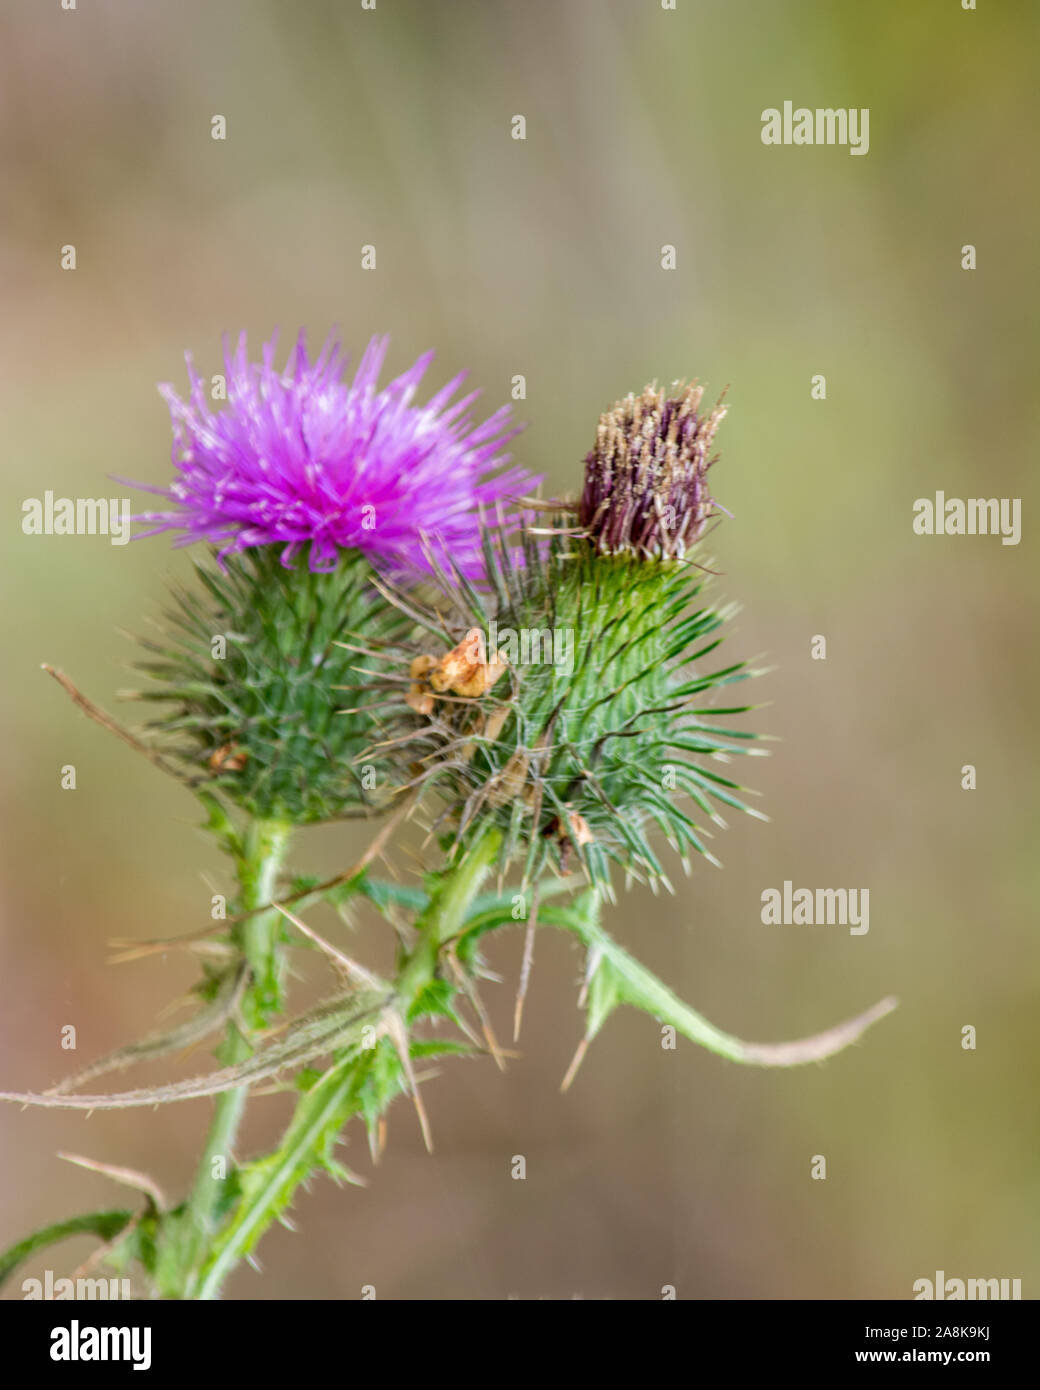 Pasture weed, Spear or Scotch Thistle, mauve pink floret with spiky bracts, Australia Stock Photo